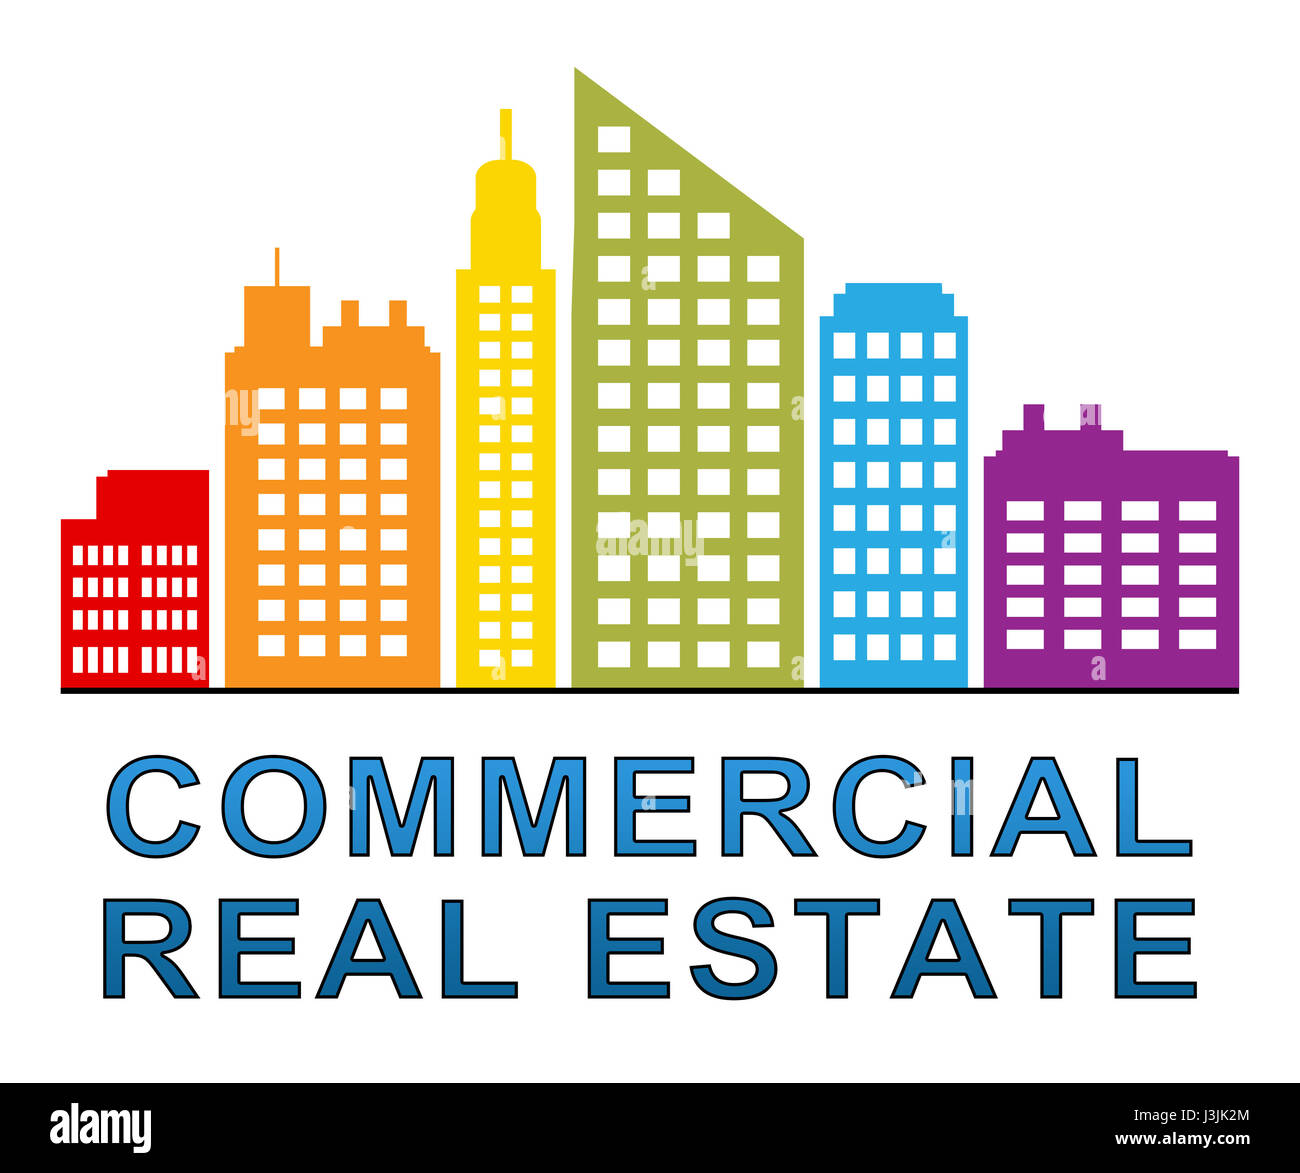 Commercial Real Estate Skyscrapers Meaning Properties Sale 3d Illustration Stock Photo